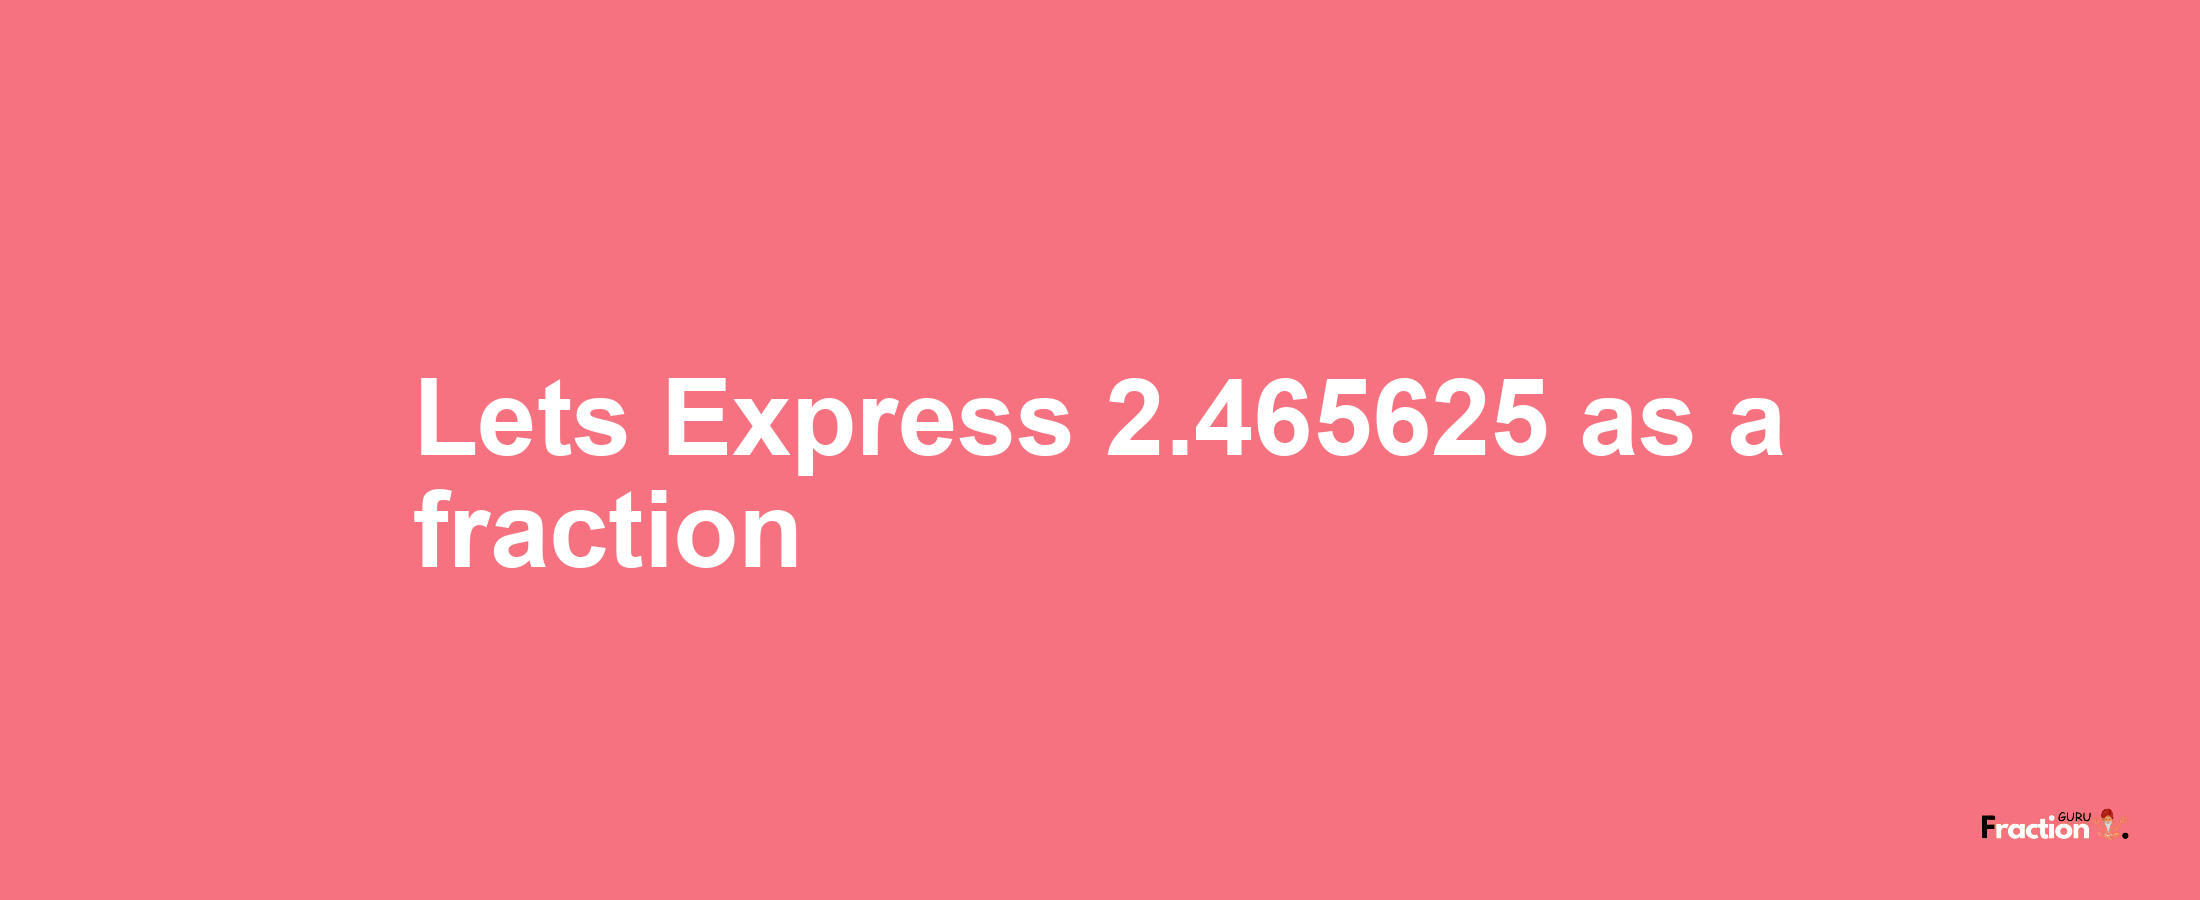 Lets Express 2.465625 as afraction